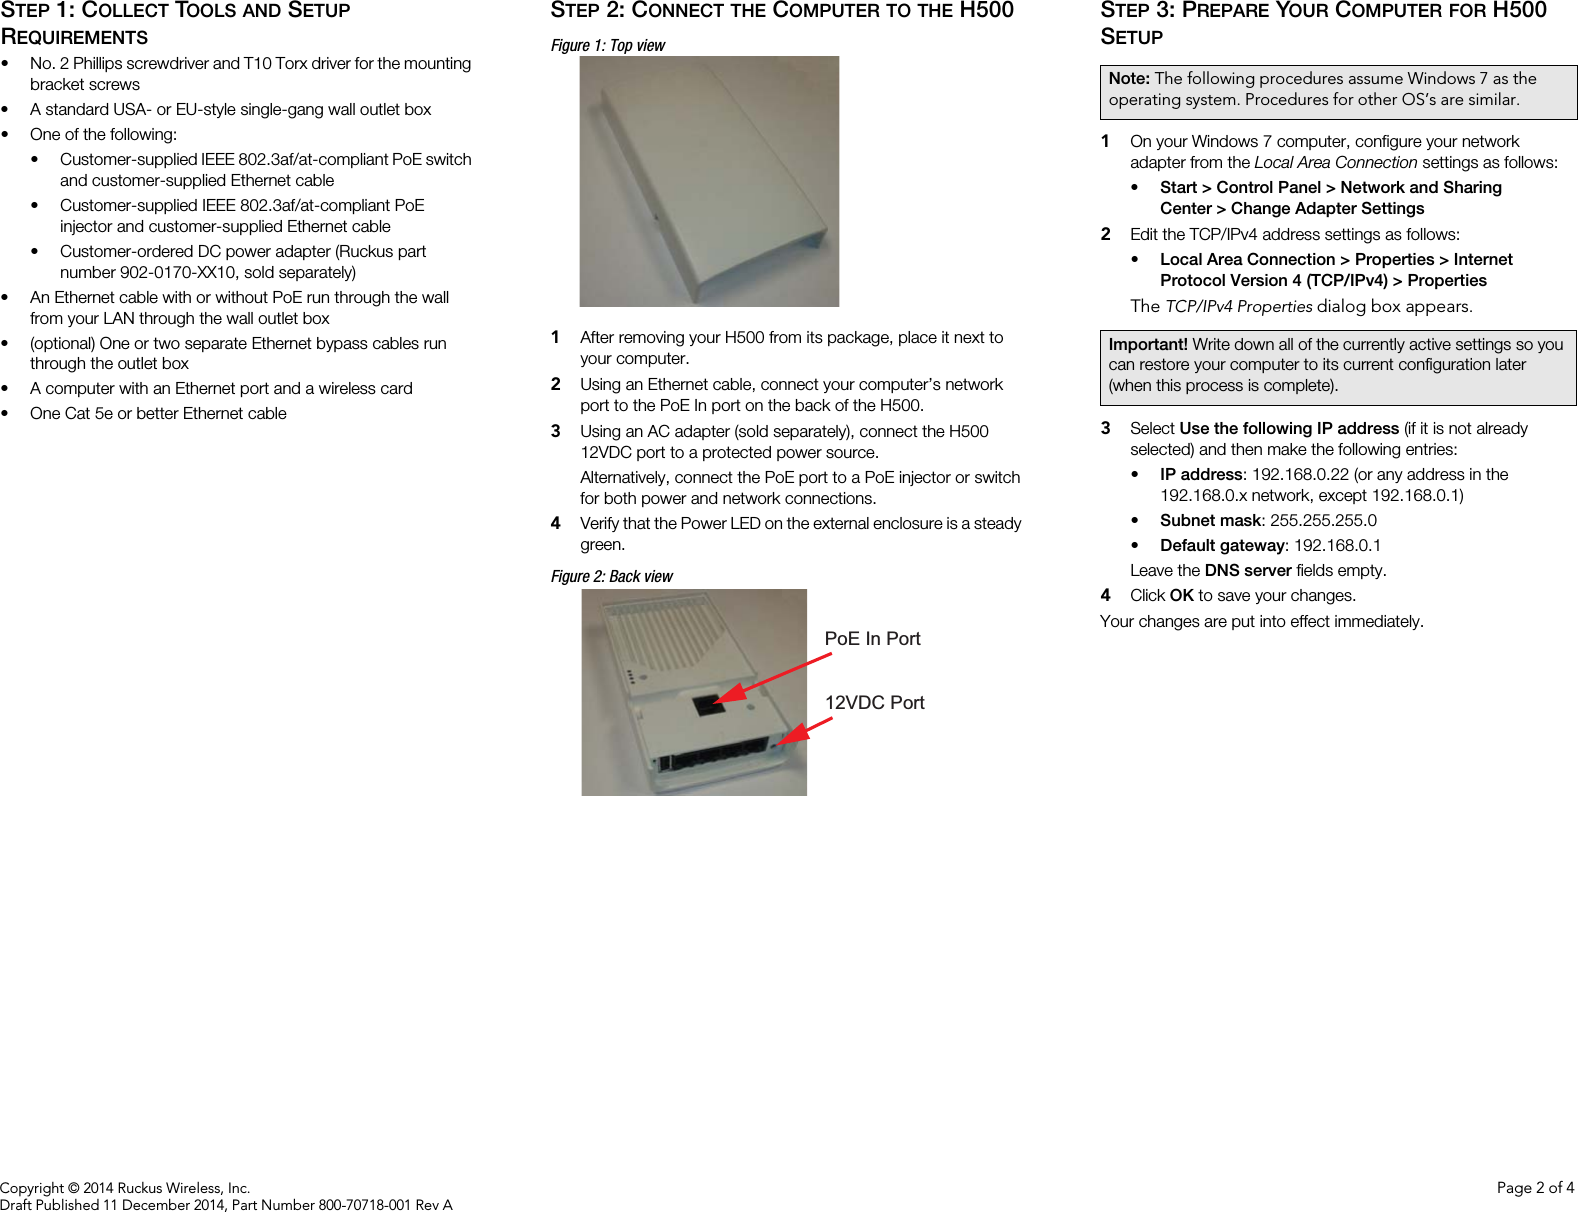 Copyright © 2014 Ruckus Wireless, Inc. Page 2 of 4Draft Published 11 December 2014, Part Number 800-70718-001 Rev ASTEP 1: COLLECT TOOLS AND SETUP REQUIREMENTS• No. 2 Phillips screwdriver and T10 Torx driver for the mounting bracket screws• A standard USA- or EU-style single-gang wall outlet box• One of the following:• Customer-supplied IEEE 802.3af/at-compliant PoE switch and customer-supplied Ethernet cable• Customer-supplied IEEE 802.3af/at-compliant PoE injector and customer-supplied Ethernet cable• Customer-ordered DC power adapter (Ruckus part number 902-0170-XX10, sold separately)• An Ethernet cable with or without PoE run through the wall from your LAN through the wall outlet box• (optional) One or two separate Ethernet bypass cables run through the outlet box• A computer with an Ethernet port and a wireless card• One Cat 5e or better Ethernet cableSTEP 2: CONNECT THE COMPUTER TO THE H500Figure 1: Top view1After removing your H500 from its package, place it next to your computer.2Using an Ethernet cable, connect your computer’s network port to the PoE In port on the back of the H500. 3Using an AC adapter (sold separately), connect the H500 12VDC port to a protected power source. Alternatively, connect the PoE port to a PoE injector or switch for both power and network connections.4Verify that the Power LED on the external enclosure is a steady green.Figure 2: Back viewSTEP 3: PREPARE YOUR COMPUTER FOR H500 SETUP1On your Windows 7 computer, configure your network adapter from the Local Area Connection settings as follows:• Start &gt; Control Panel &gt; Network and Sharing Center &gt; Change Adapter Settings2Edit the TCP/IPv4 address settings as follows: • Local Area Connection &gt; Properties &gt; Internet Protocol Version 4 (TCP/IPv4) &gt; PropertiesThe TCP/IPv4 Properties dialog box appears.3Select Use the following IP address (if it is not already selected) and then make the following entries:•IP address: 192.168.0.22 (or any address in the 192.168.0.x network, except 192.168.0.1)•Subnet mask: 255.255.255.0•Default gateway: 192.168.0.1Leave the DNS server fields empty.4Click OK to save your changes.Your changes are put into effect immediately. PoE In Port12VDC PortNote: The following procedures assume Windows 7 as the operating system. Procedures for other OS’s are similar.Important! Write down all of the currently active settings so you can restore your computer to its current configuration later (when this process is complete).